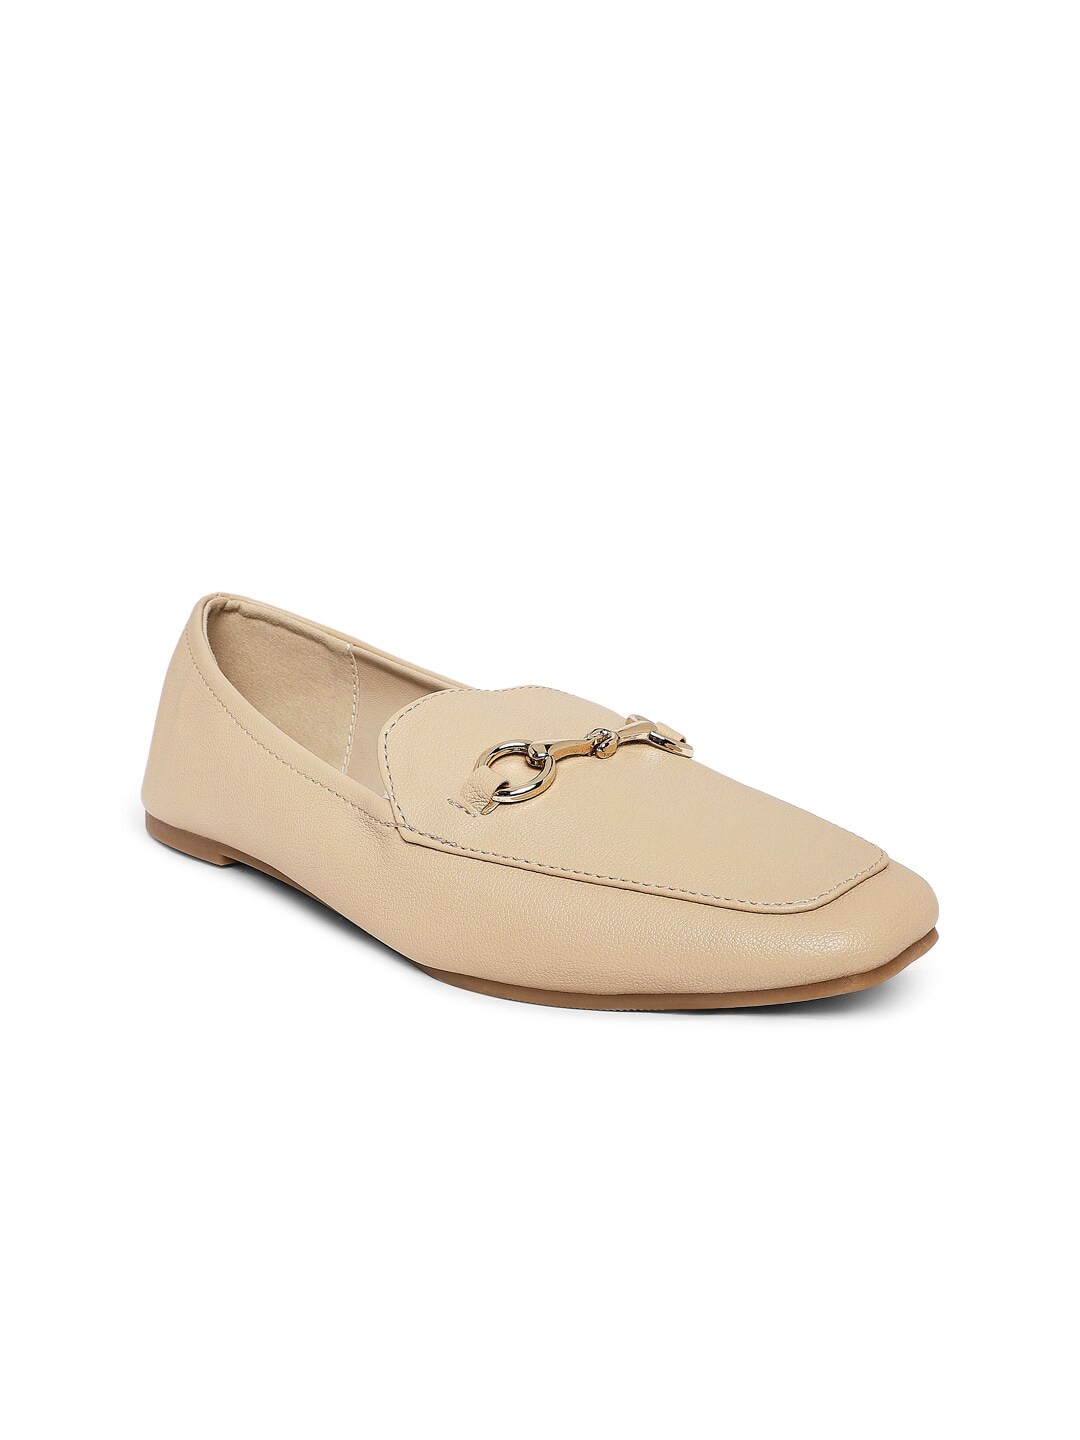 Forever Glam by Pantaloons Women Beige PU Loafers Price in India